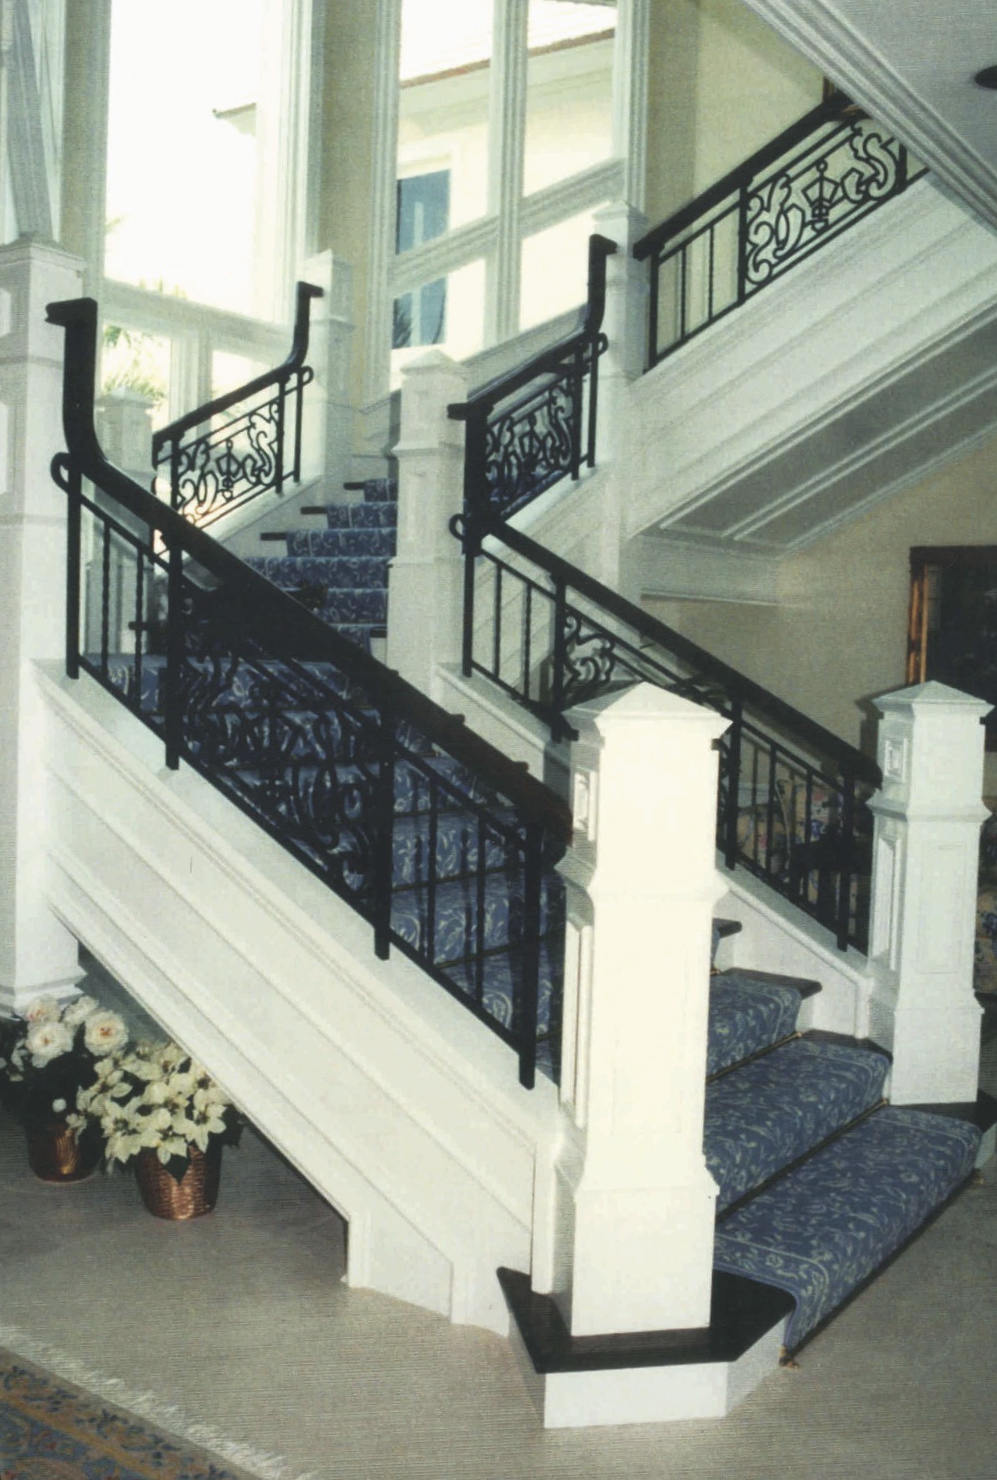 7' wide grand staircase using painted wood and iron with<br />monumental newels, three flights, two landings,  approx. 50'<br />horizontal railings/balustrade - Sailfish Point